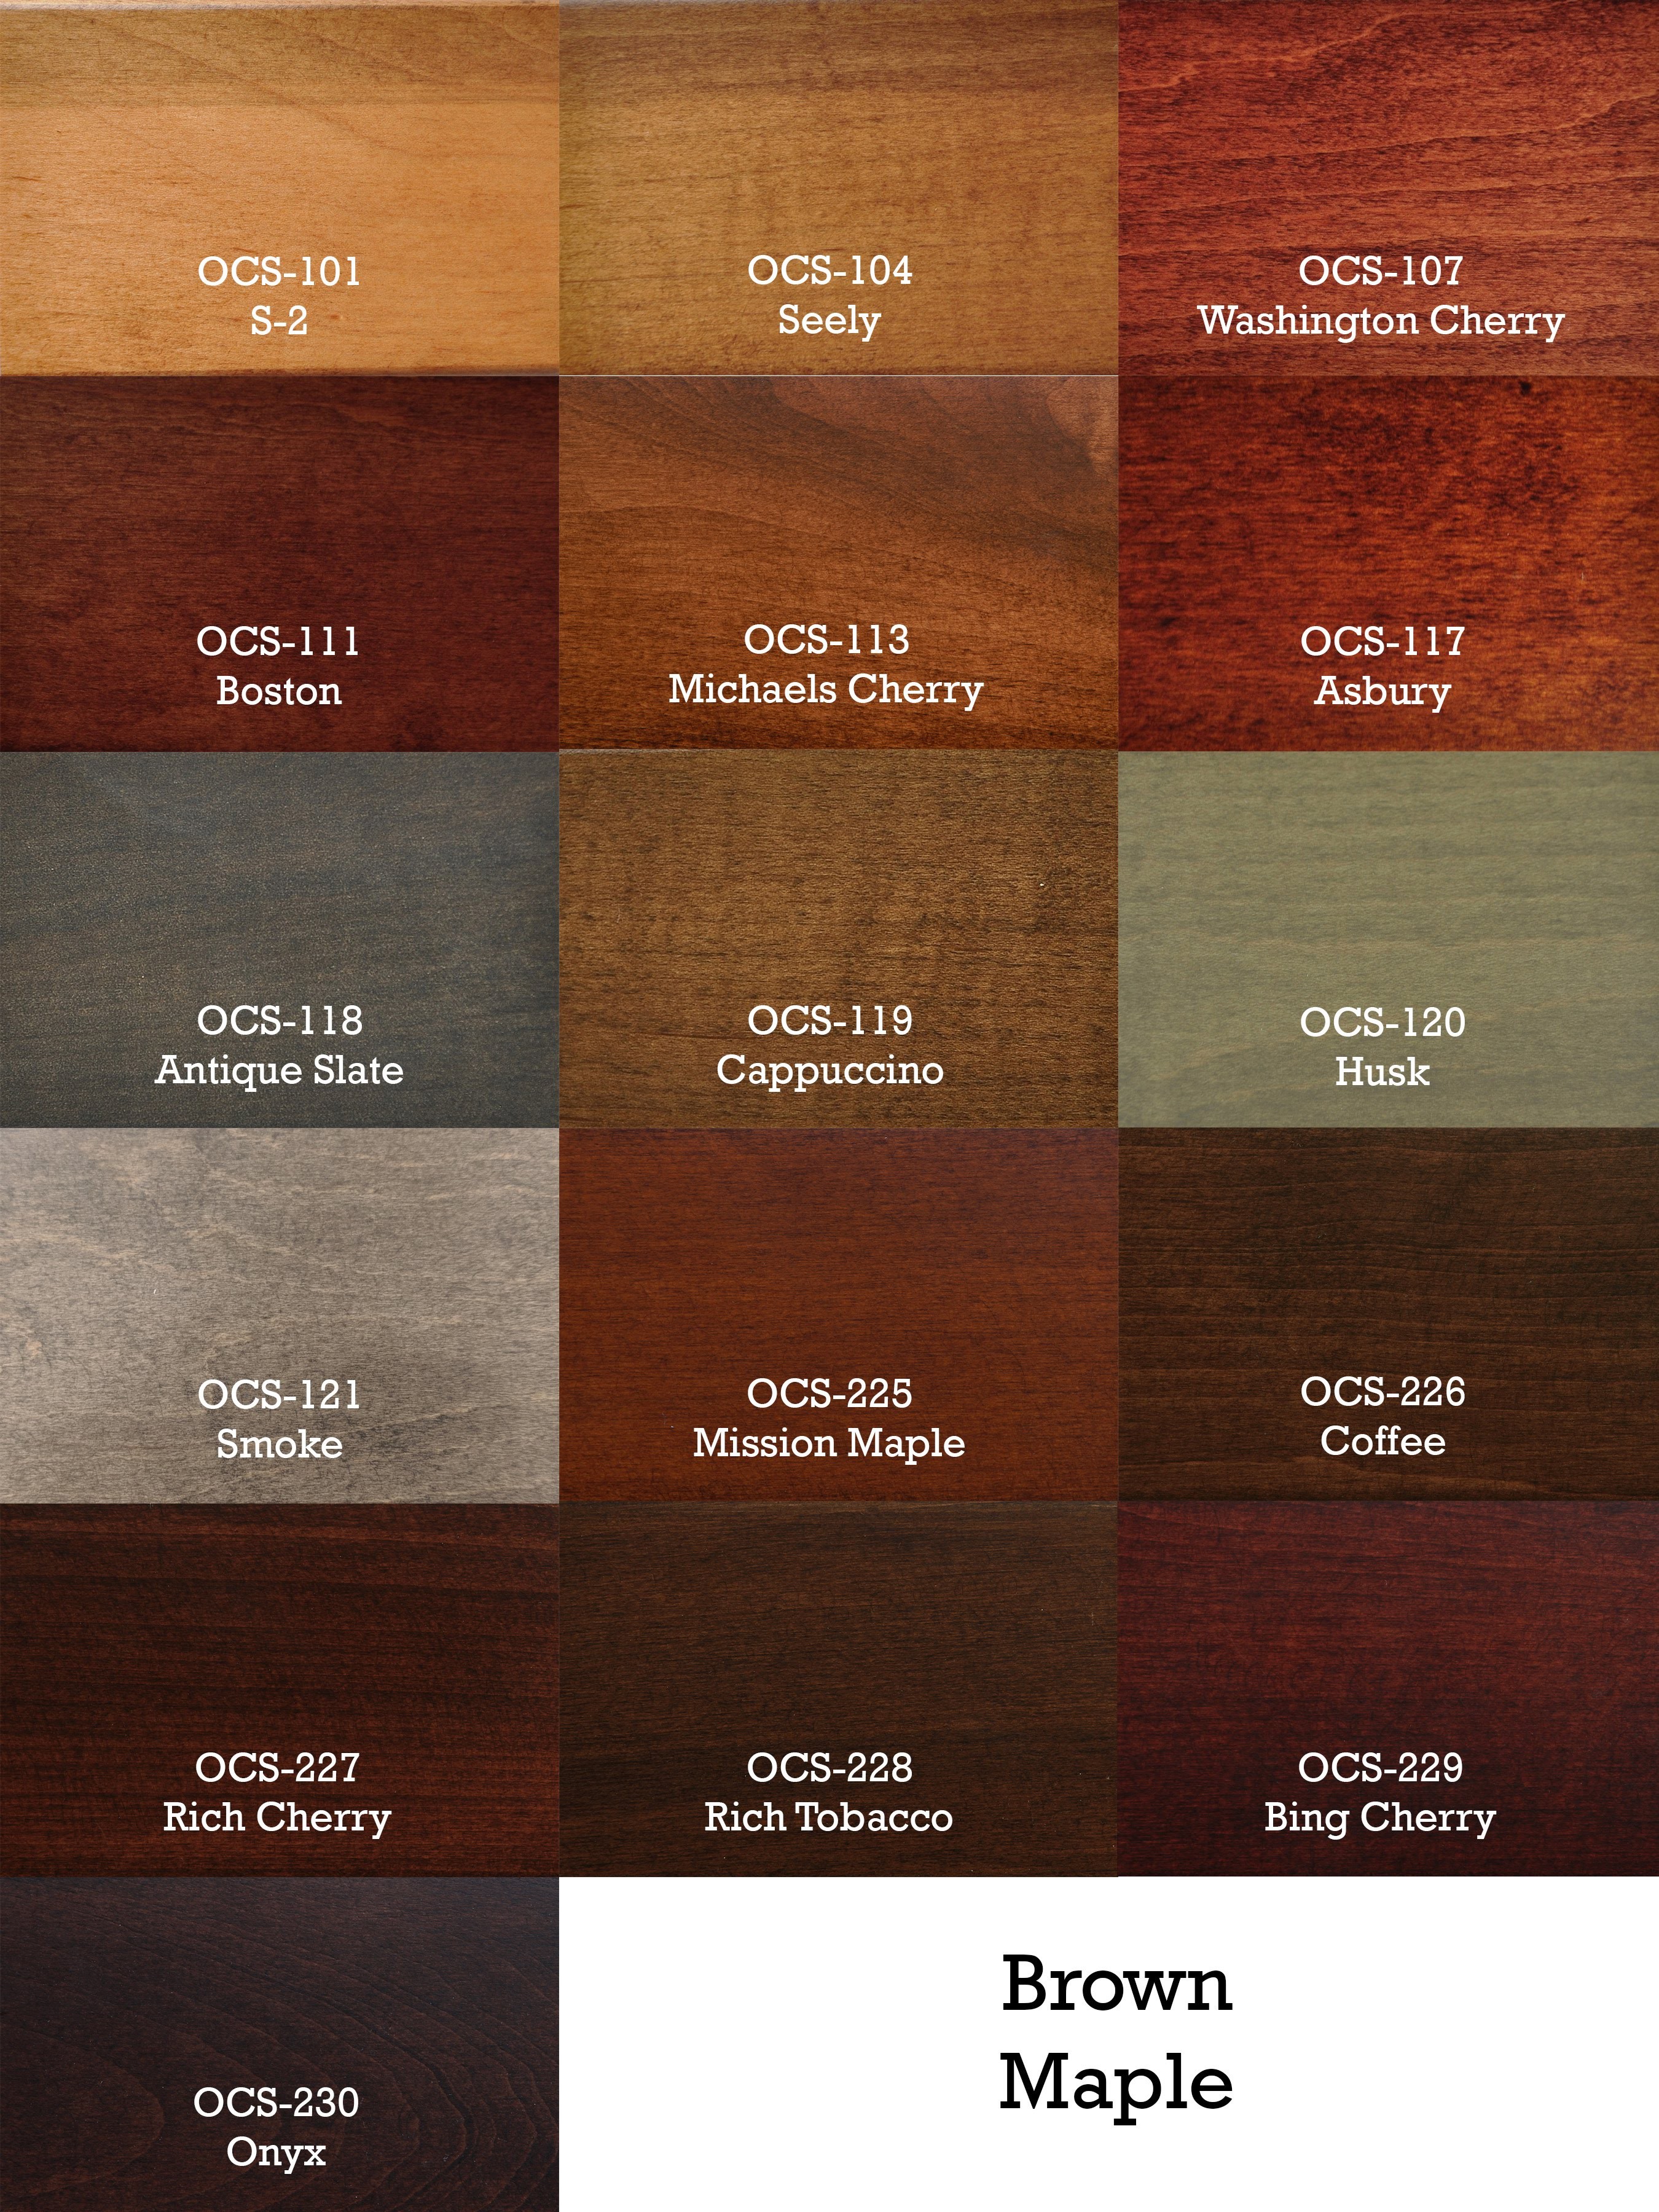 Brown Maple Wood Finishes